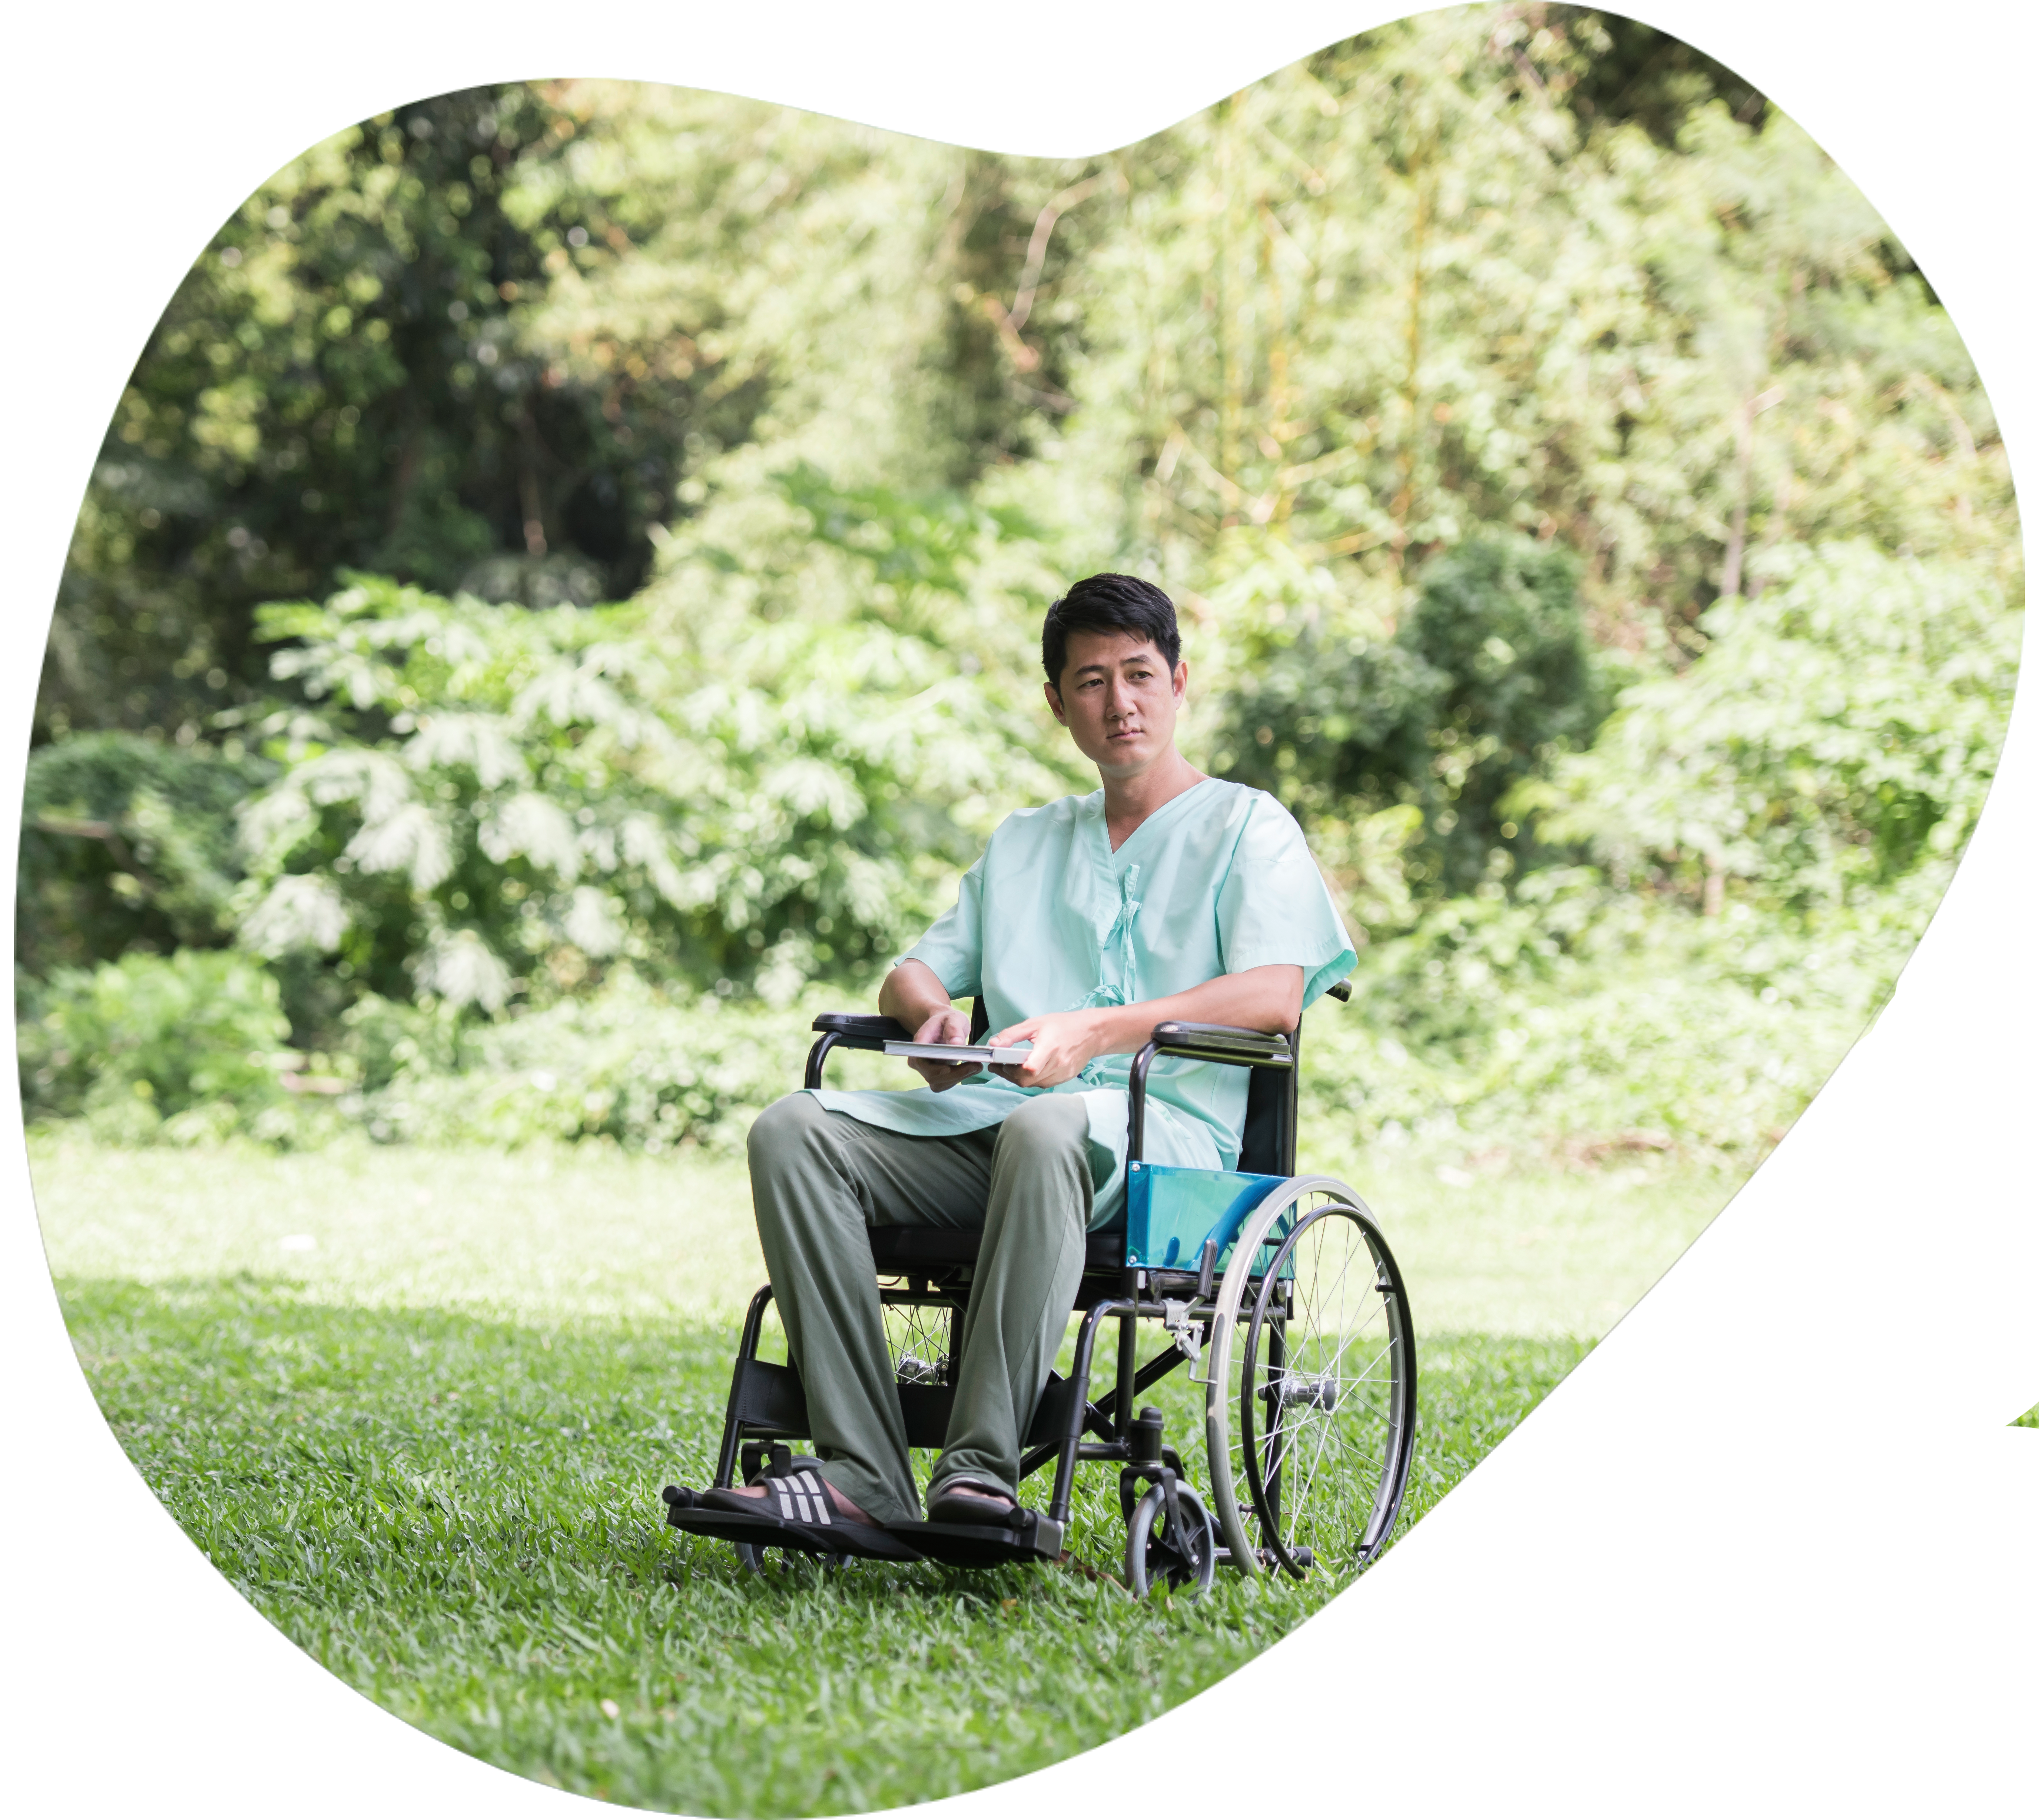 young man in wheelchair